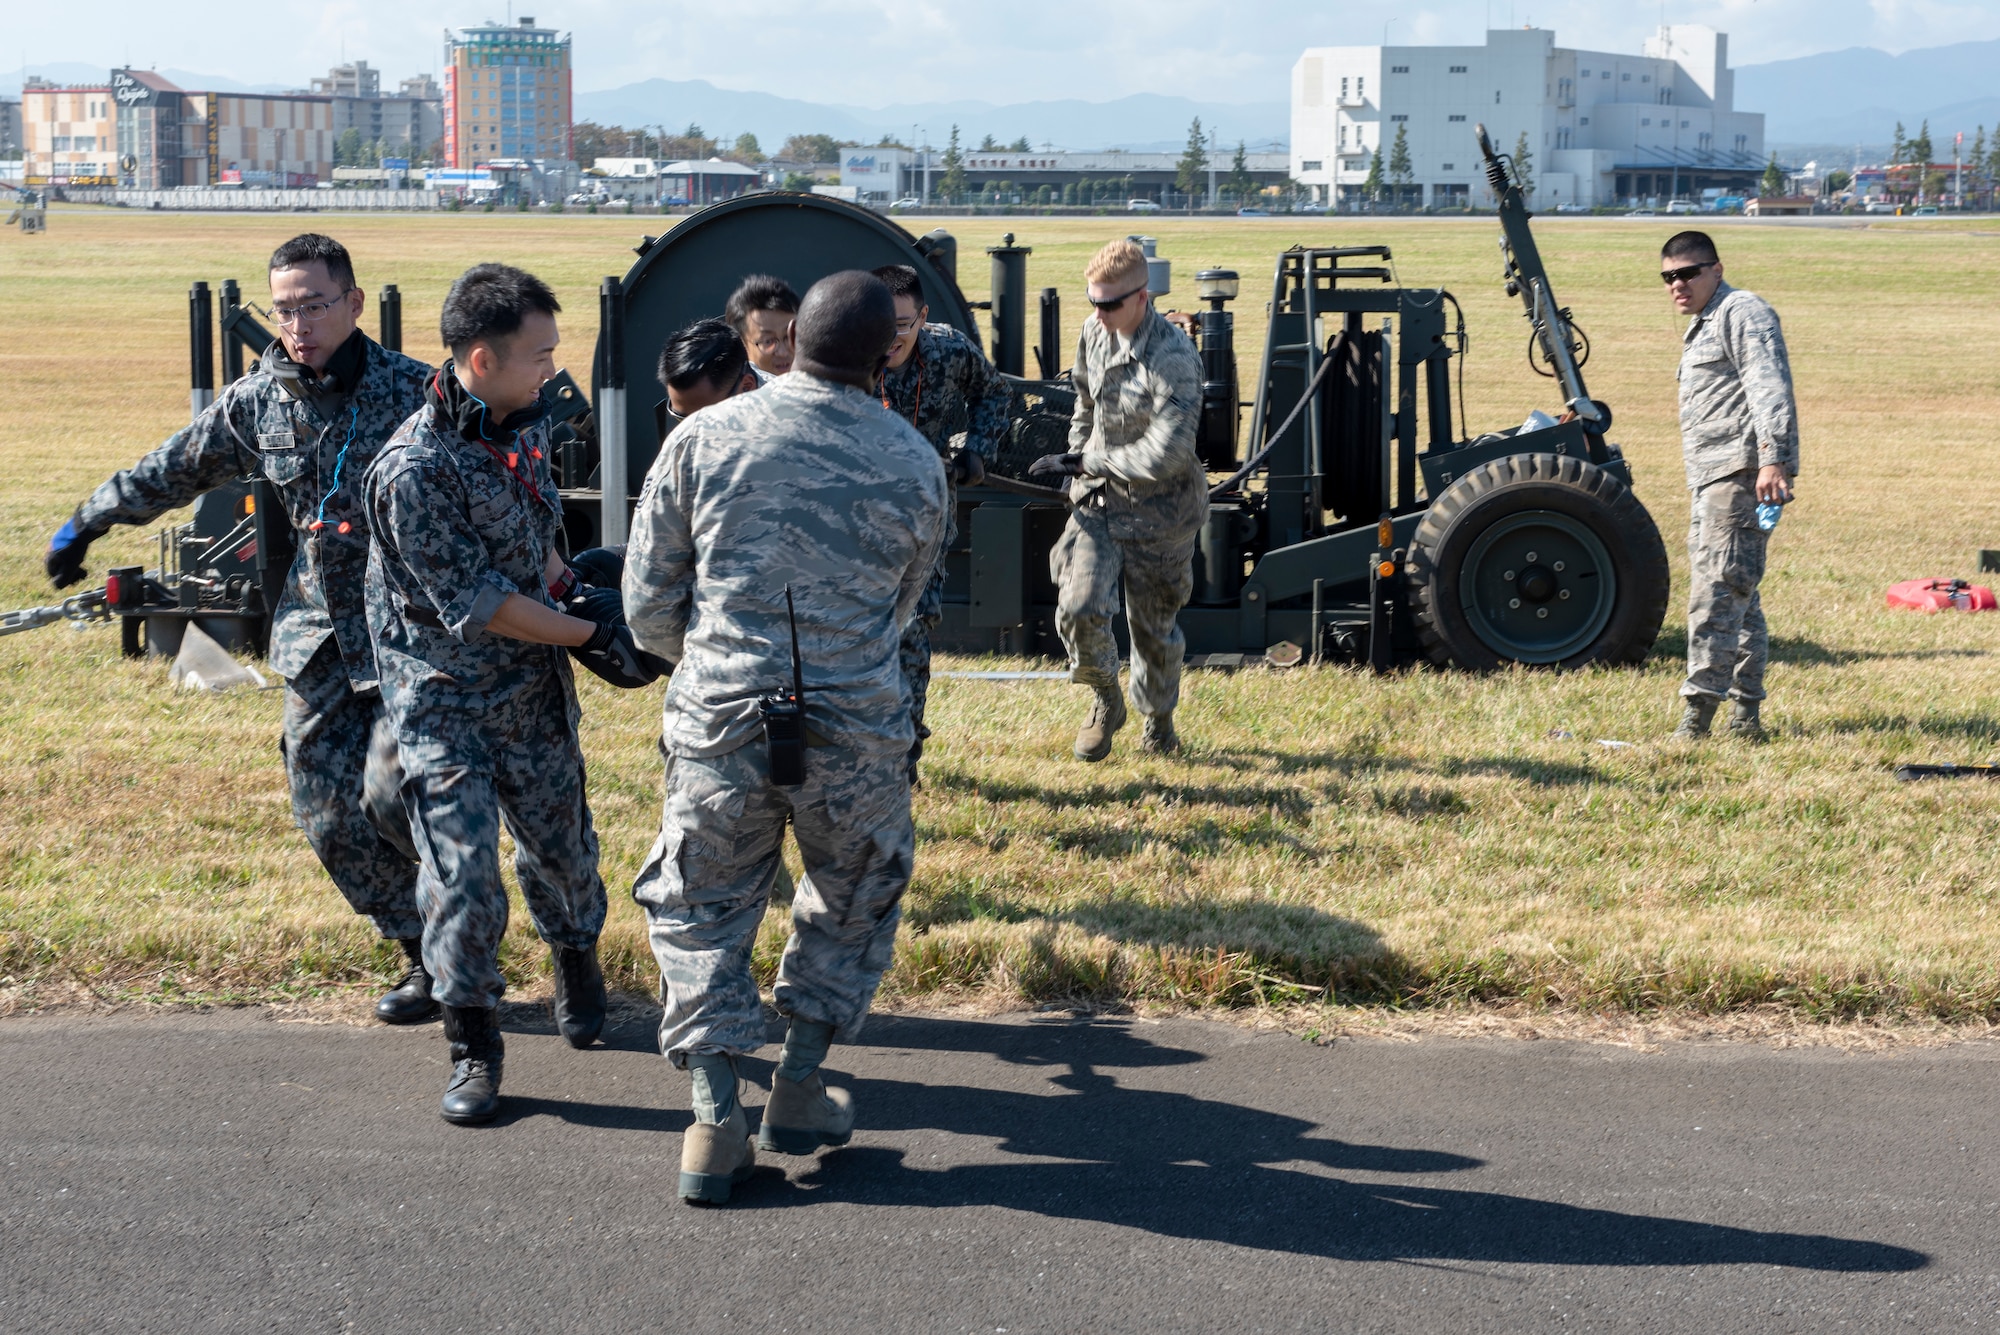 Airmen from the 374th Civil Engineer Squadron work with Koku Jietai (Japan Air Self-Defense Force) members to pull the cable of the Mobile Aircraft Arresting System (MAAS) across the runway at a bilateral training event at Yokota Air Base, Japan, Oct. 25, 2018.